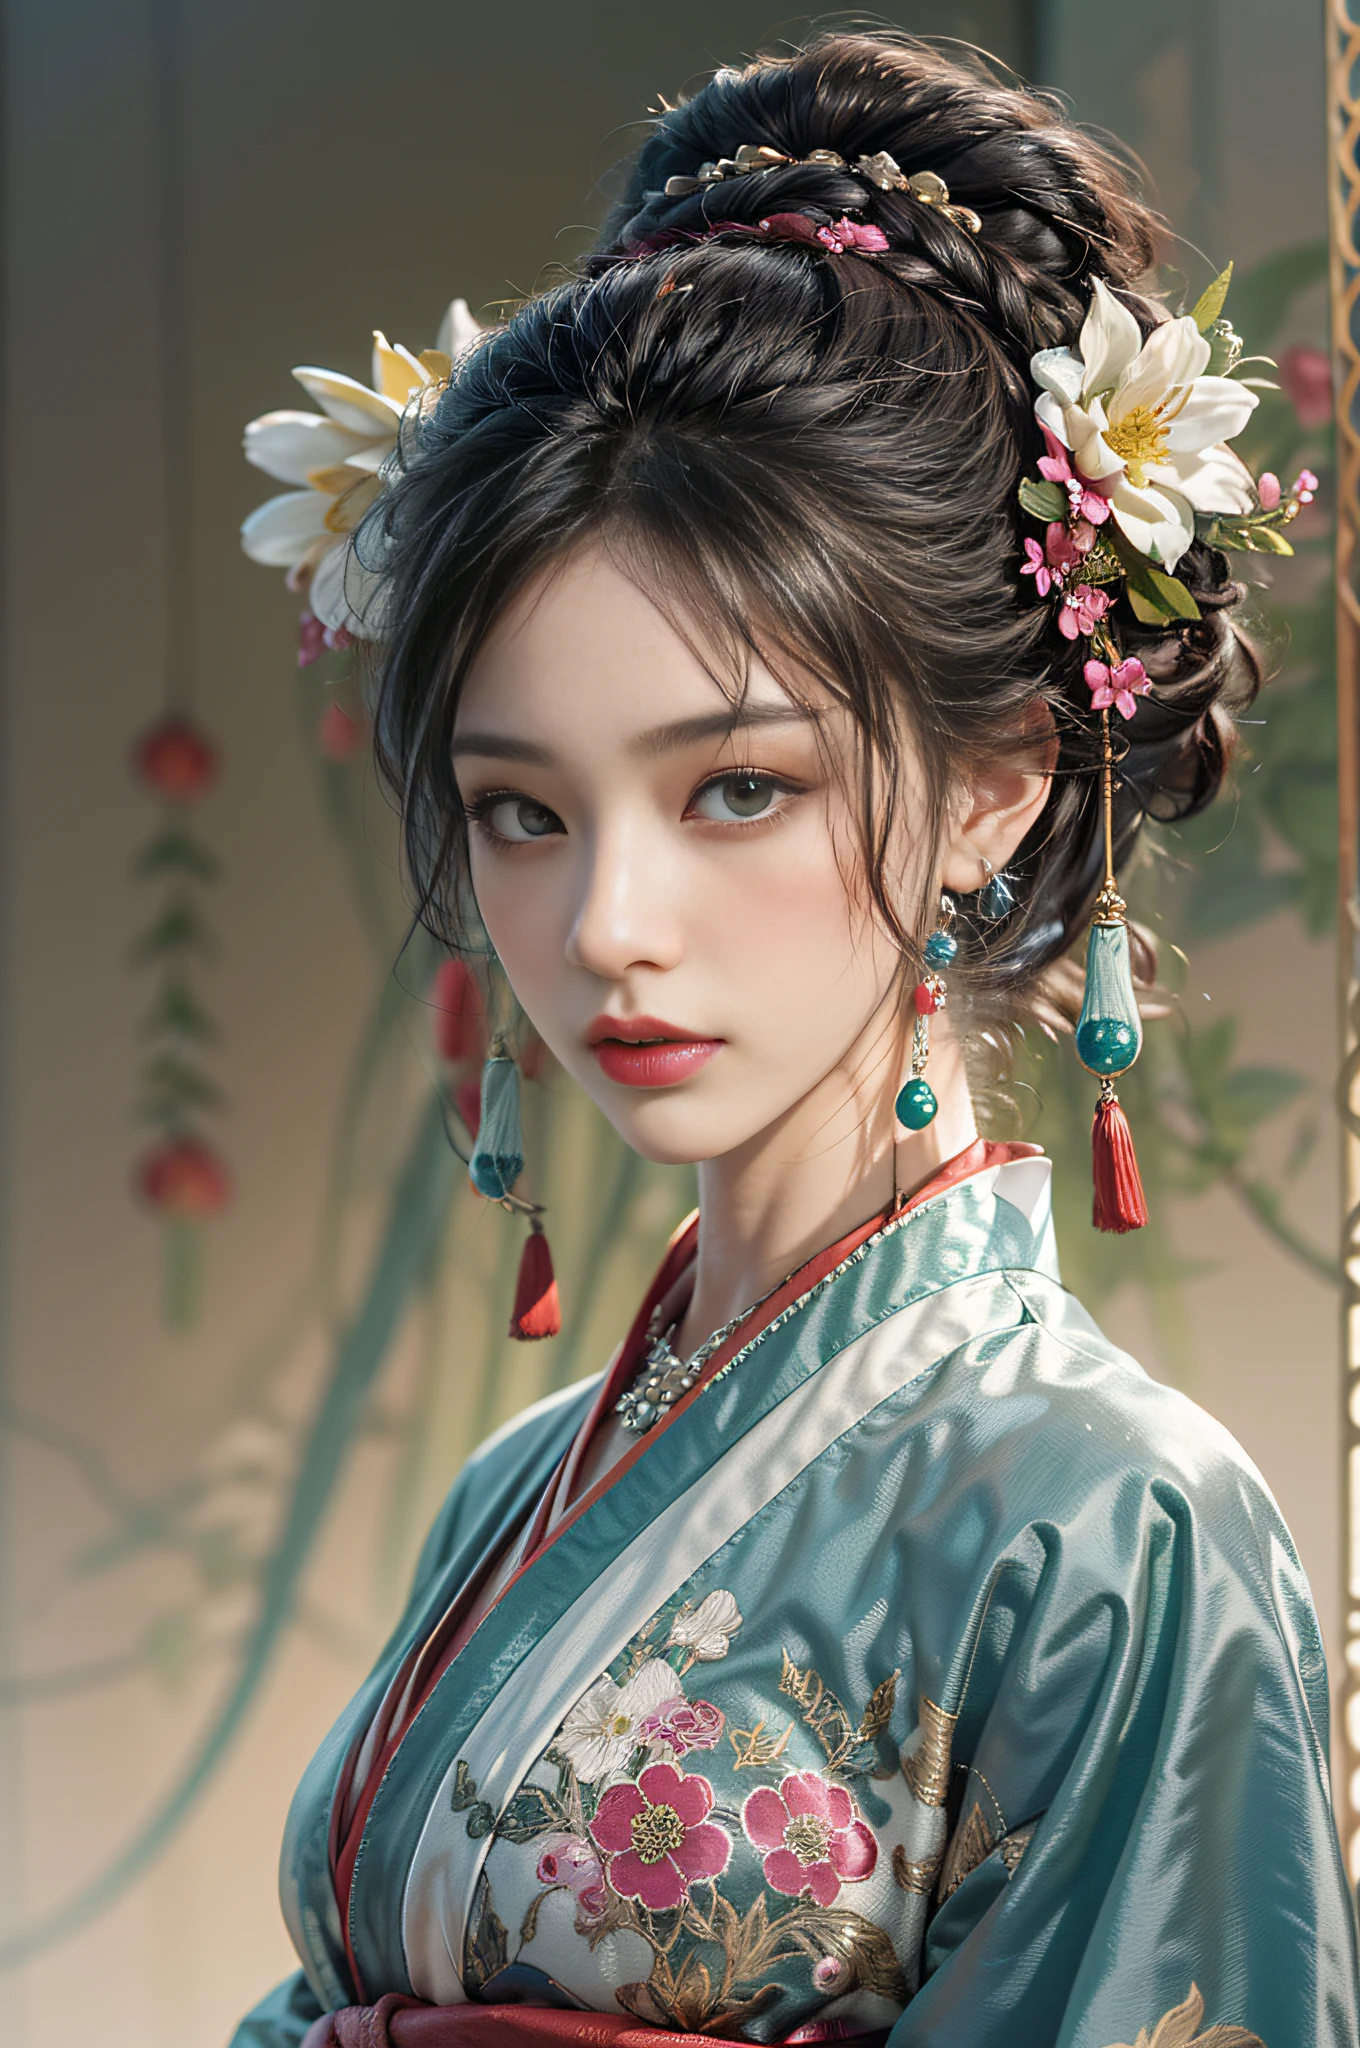 This art depicts a photorealistic charming young girl wearing a traditional hanfu, the hanfu is decorated with intricate patterns and in noble colours. Her hanfu is silky smooth, drapes elegantly over her perfect anatomy figure accentuating her seductive silhouette. She has huge breasts and revealing cleavage. She stood gracefully in the quiet moonlit night, bathed in the soft glow of the moonlight. The scene exudes an oriental and dreamy atmosphere, with a touch of mystery. The graphic style blends watercolor and CGI techniques to evoke a refined beauty and charm. The moonlight shines on her three-dimensional facial features. add_detail:0.5, updo hairs, medium hairs, headband decorated with flowers, jade necklace, earring